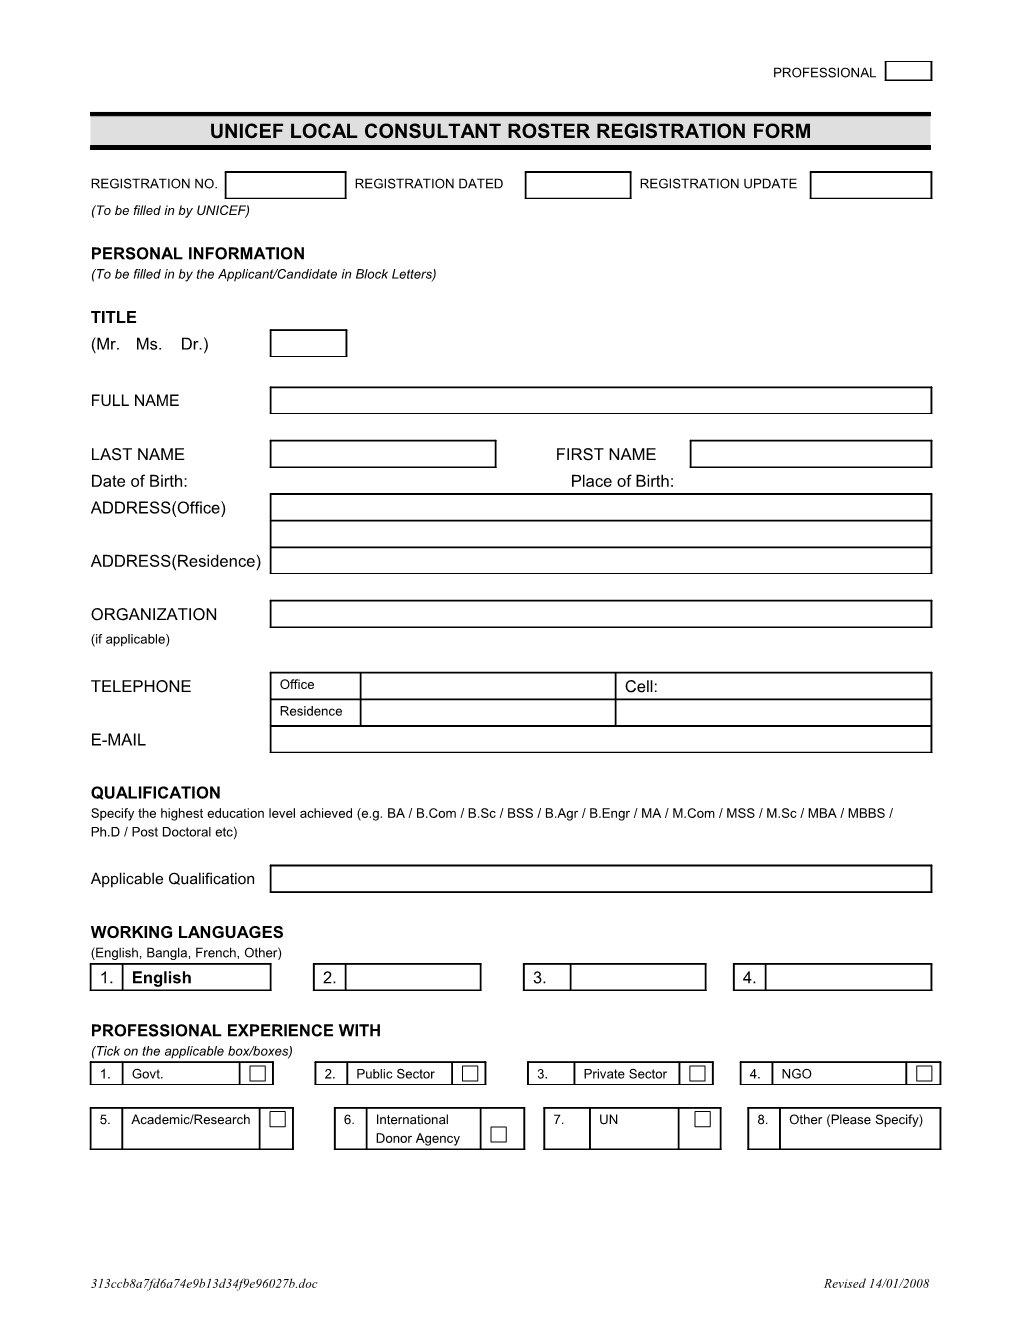 Unicef Local Consultant Roster Registration Form